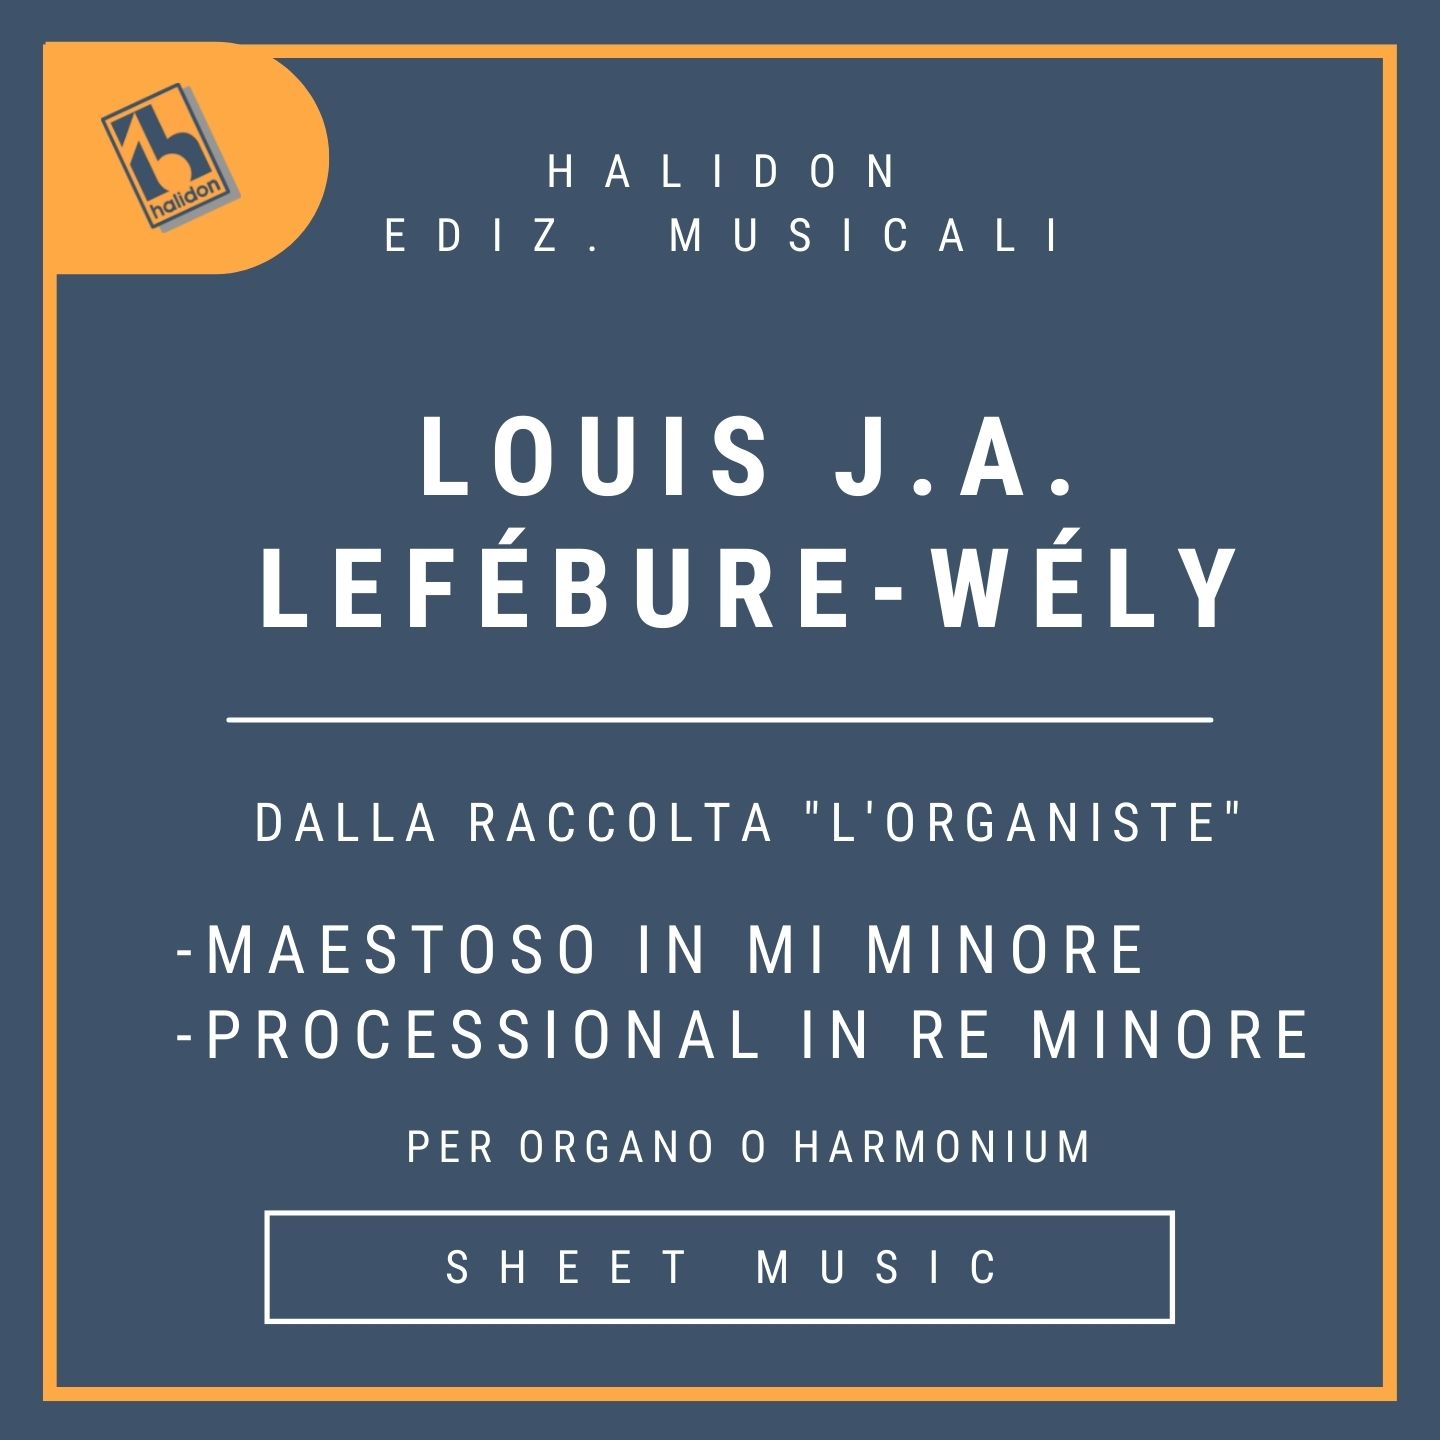 Louis J.A. Lefébure-Wély - Maestoso in E minor - Processional in D minor (from the collection 'L'organiste')